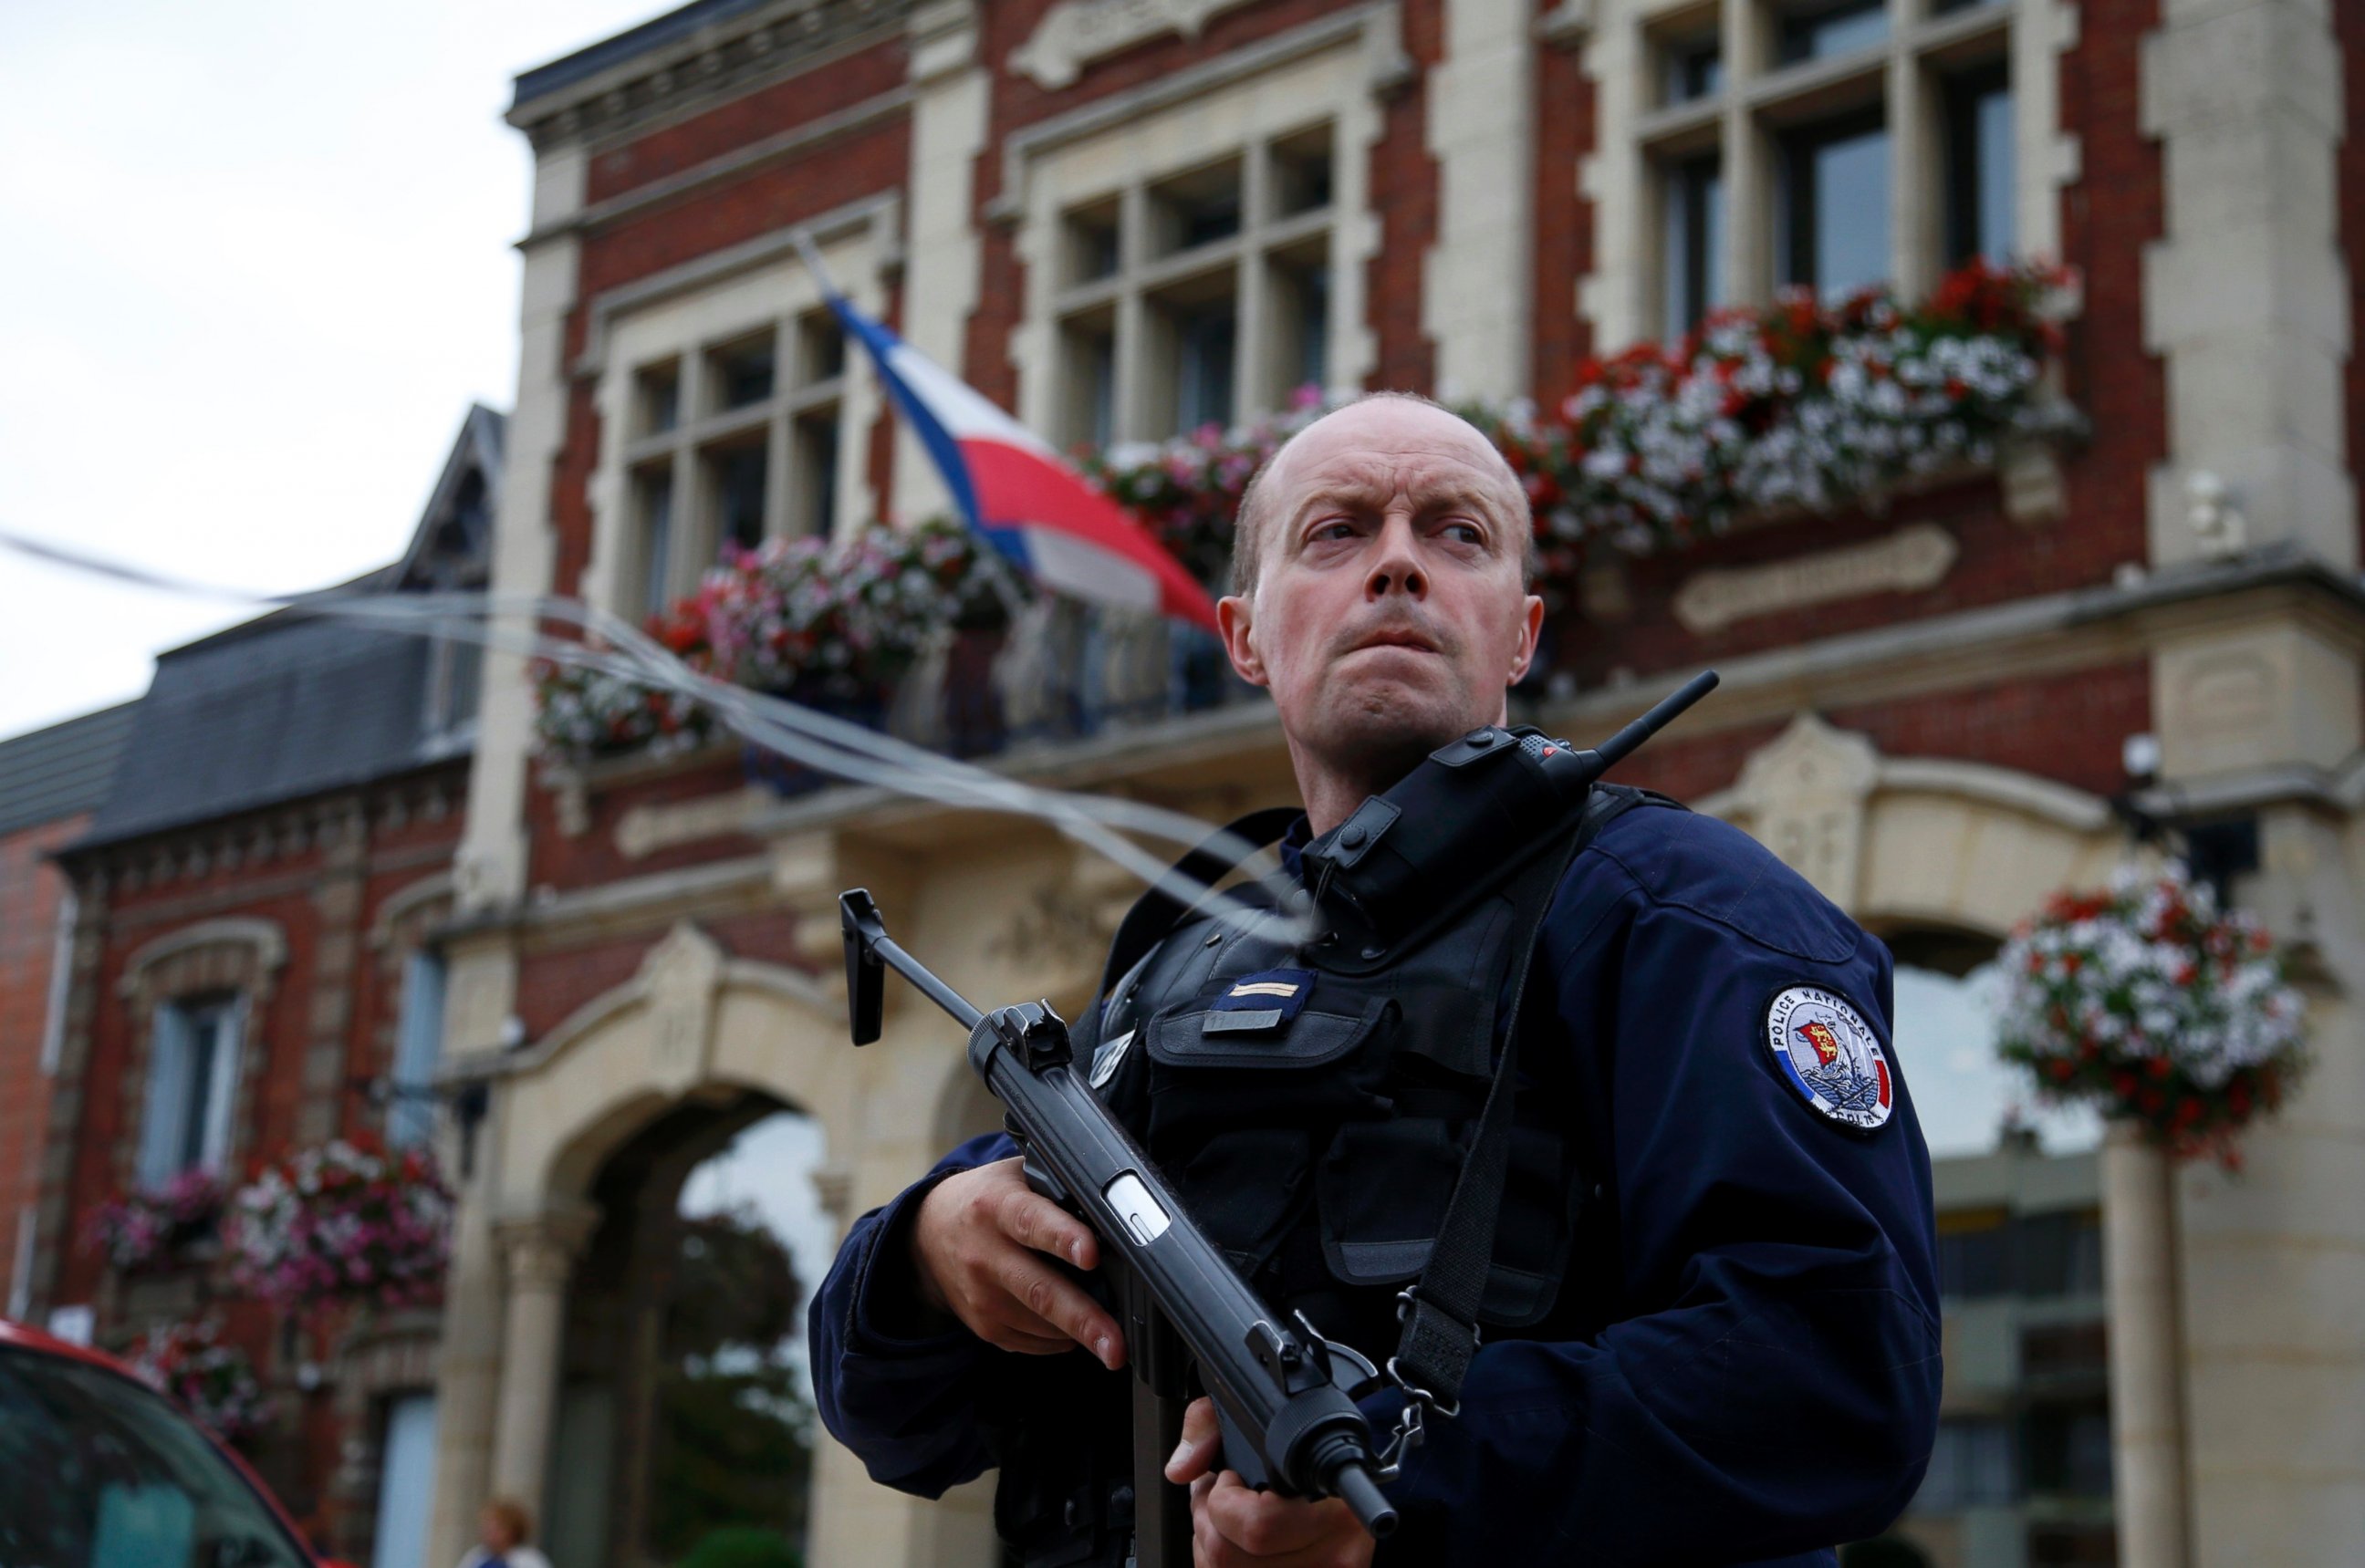 PHOTO: A policeman secures a position in front of the city hall after two assailants had taken five people hostage in the church at Saint-Etienne-du-Rouvray near Rouen in Normandy, France, July 26, 2016. 